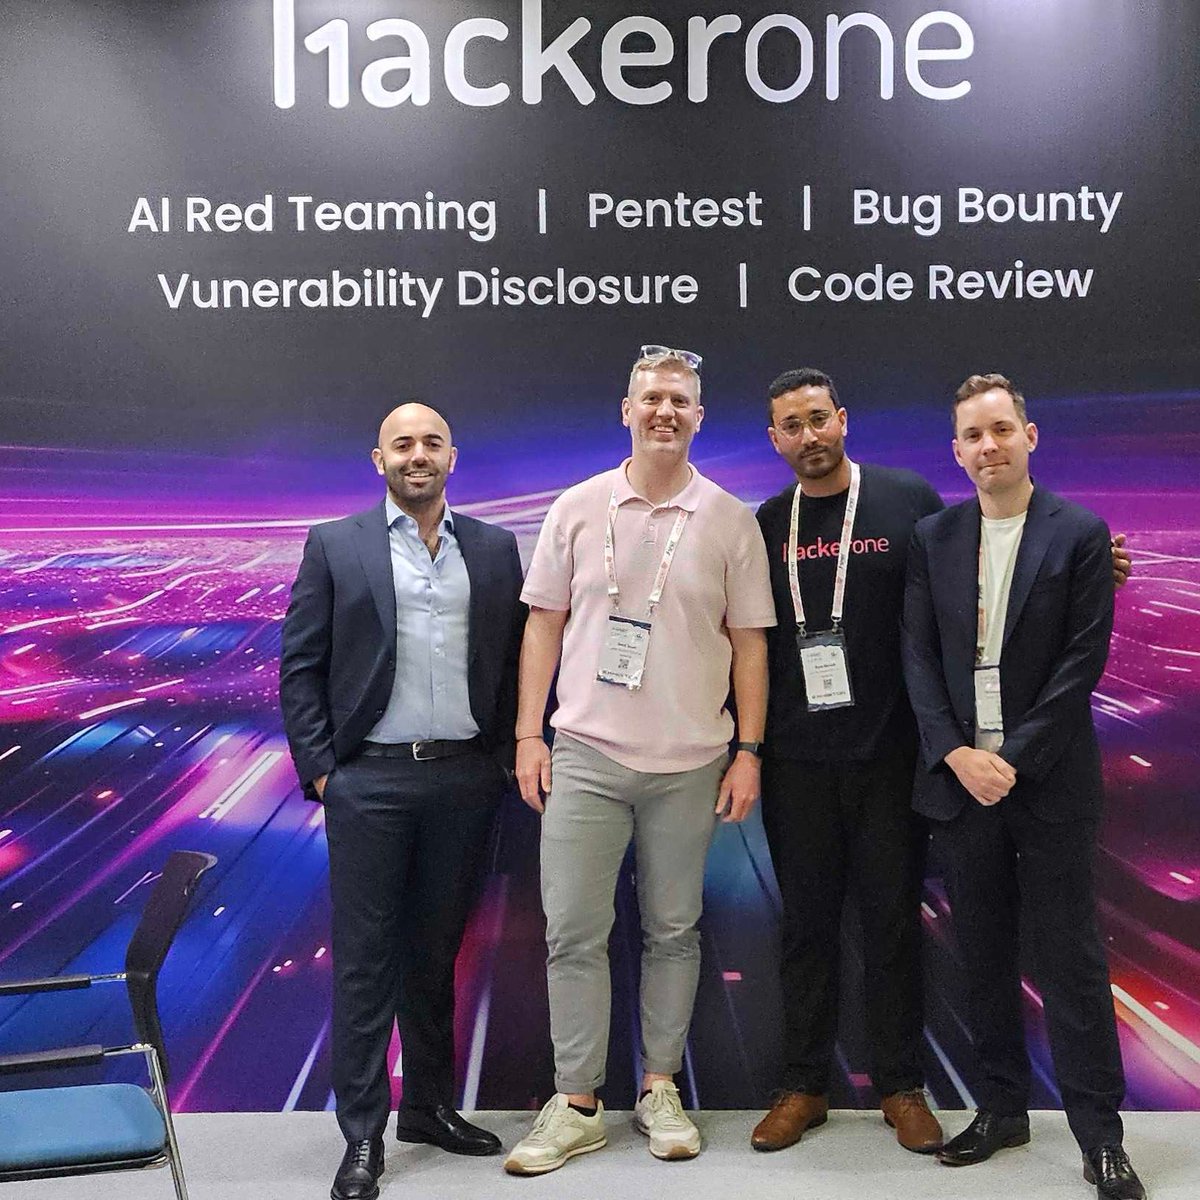 It was great to see everyone on Day 1 of @GISECGlobal in Dubai! Ready to take your security strategy to the next level with AI Red Teaming and better pentests? Drop by booth F16 all day today and tomorrow to chat with our experts and learn more about the HackerOne platform.